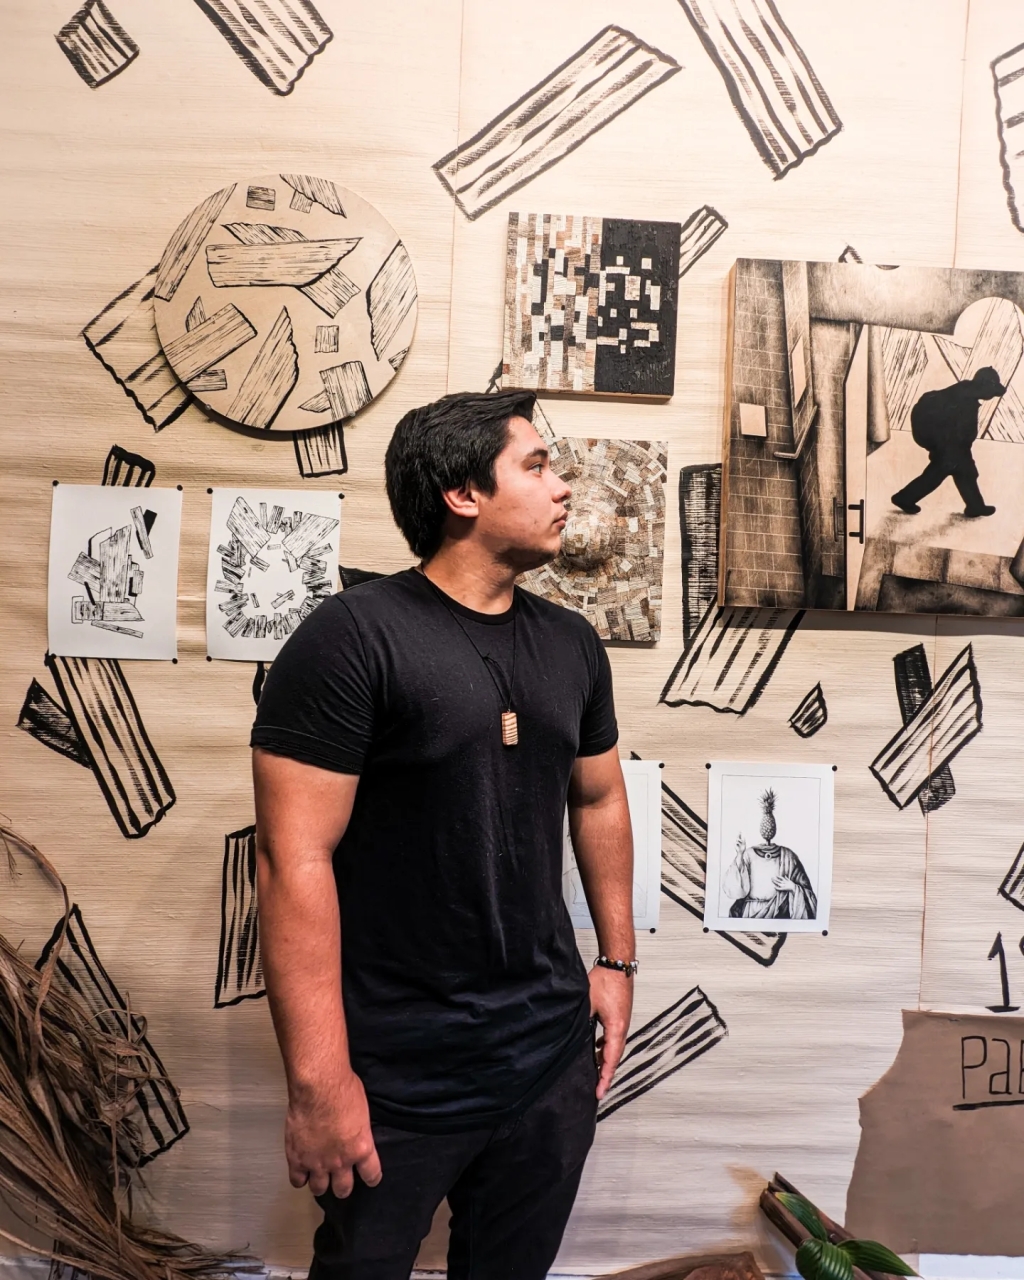 Pablo Mutate stands with his artwork made with charcoal and recycled palm stems used for his Open Studio and created during his residency at Miami Artists Nonprofit Residency Rainbow Oasiiis